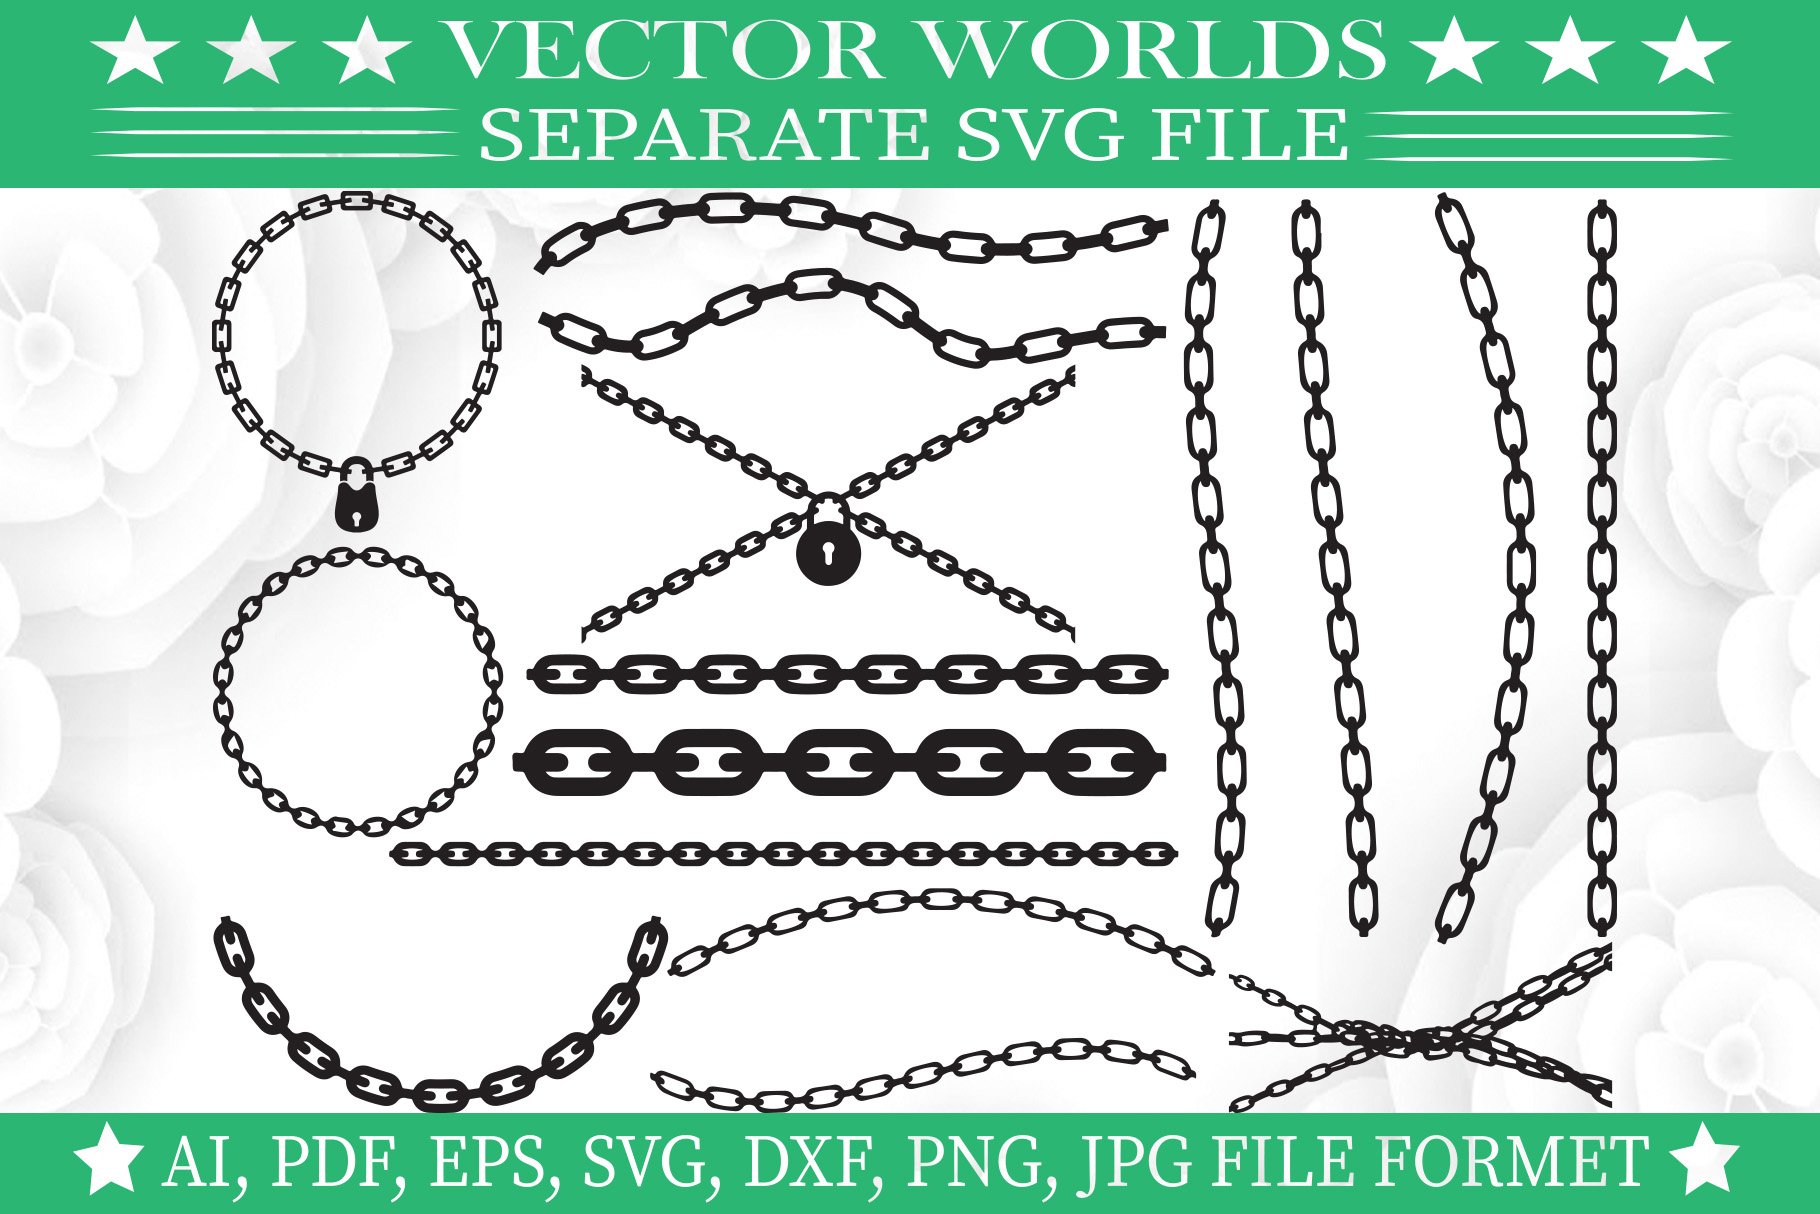 Chain Svg, Power, Grunge Svg cover image.